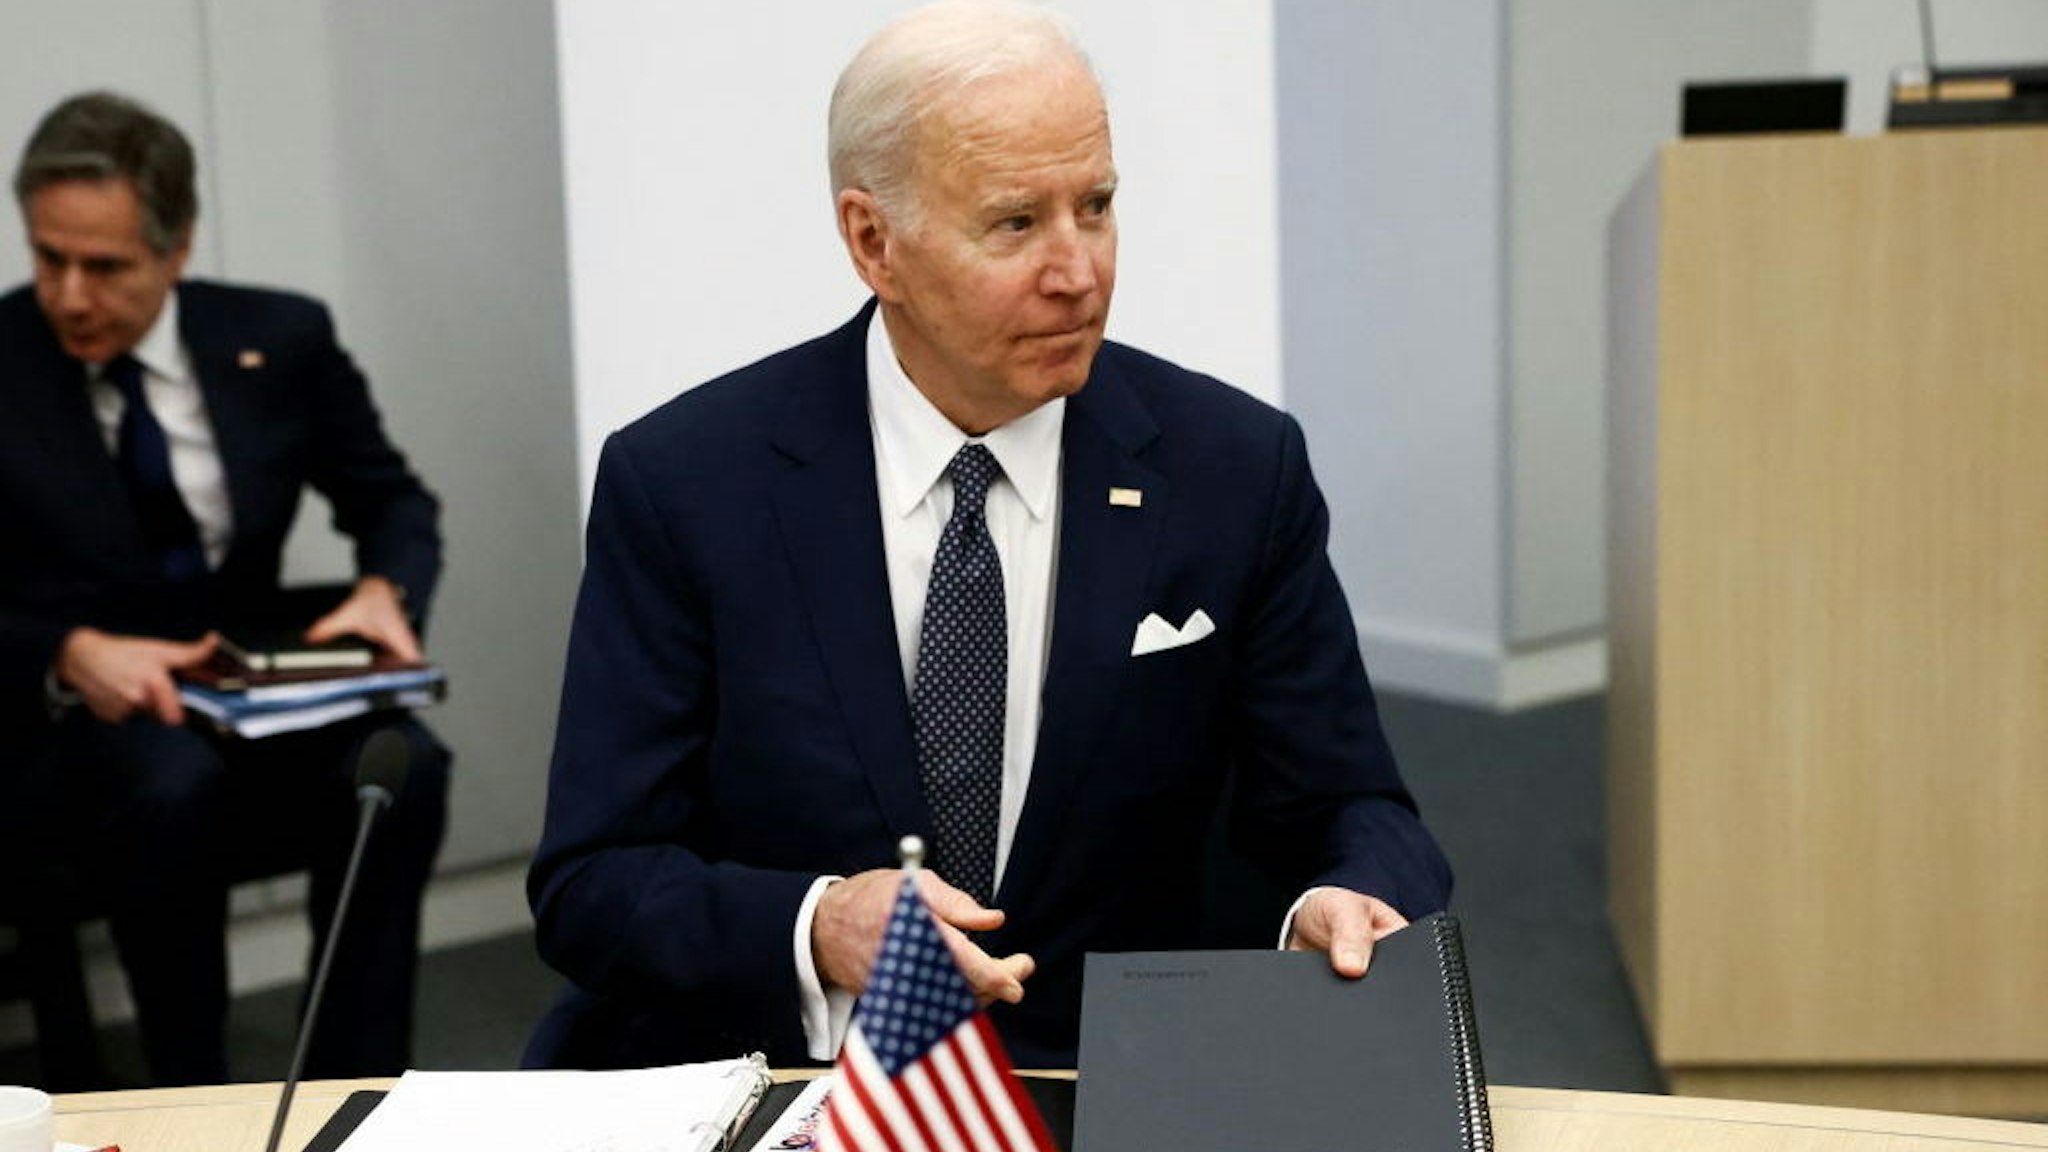 BRUSSELS, BELGIUM - MARCH 24: U.S. President Joe Biden attends a G7 leaders meeting during a NATO summit on Russia's invasion of Ukraine, at the alliance's headquarters in Brussels, on March 24, 2022 in Brussels, Belgium. Heads of State and Government take part in the North Atlantic Council (NAC) Summit. They will discuss the consequences of President Putin's invasion of Ukraine and the role of China in the crisis. Then decide on the next steps to strengthen NATO's deterrence and defence. (Photo Henry Nicholls - Pool/Getty Images)